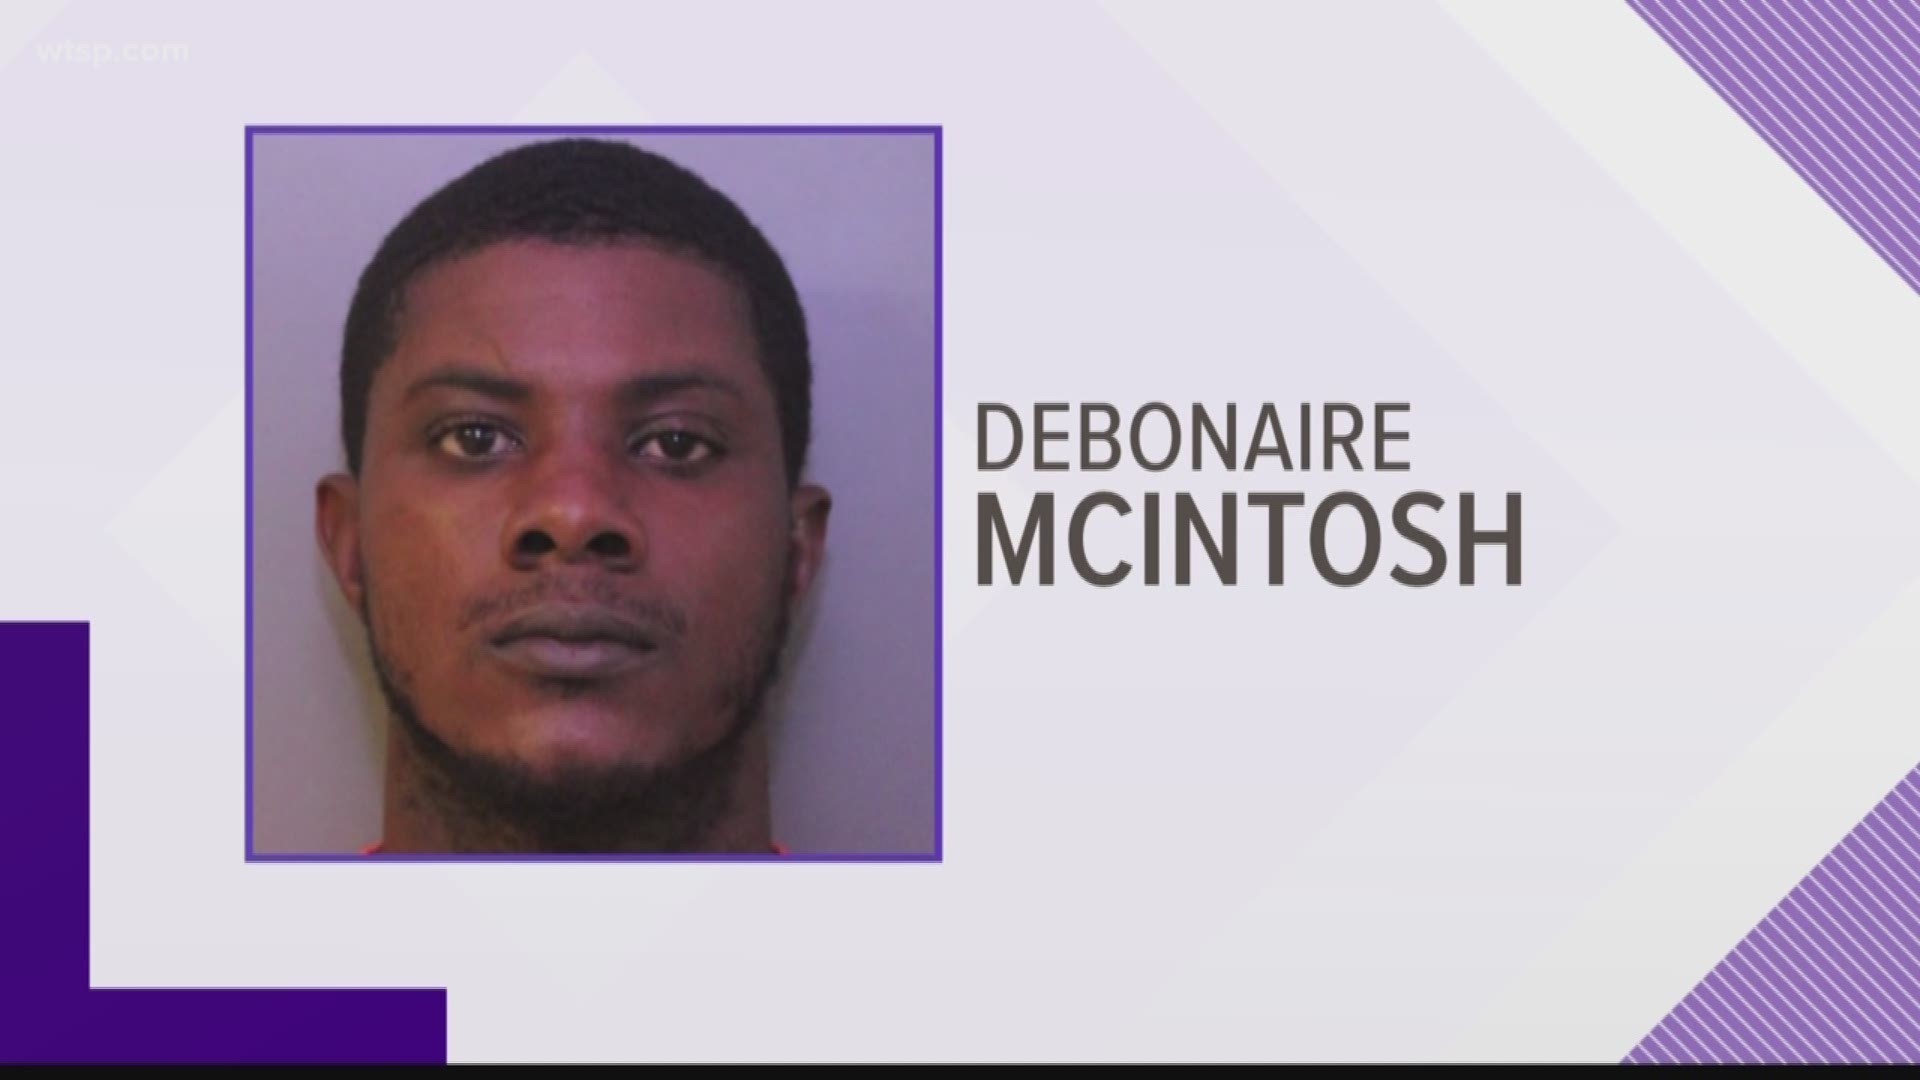 Debonaire Antoine McIntosh faces a first-degree murder charge in connection with a shooting in Winter Haven.  https://on.wtsp.com/2meQBcM